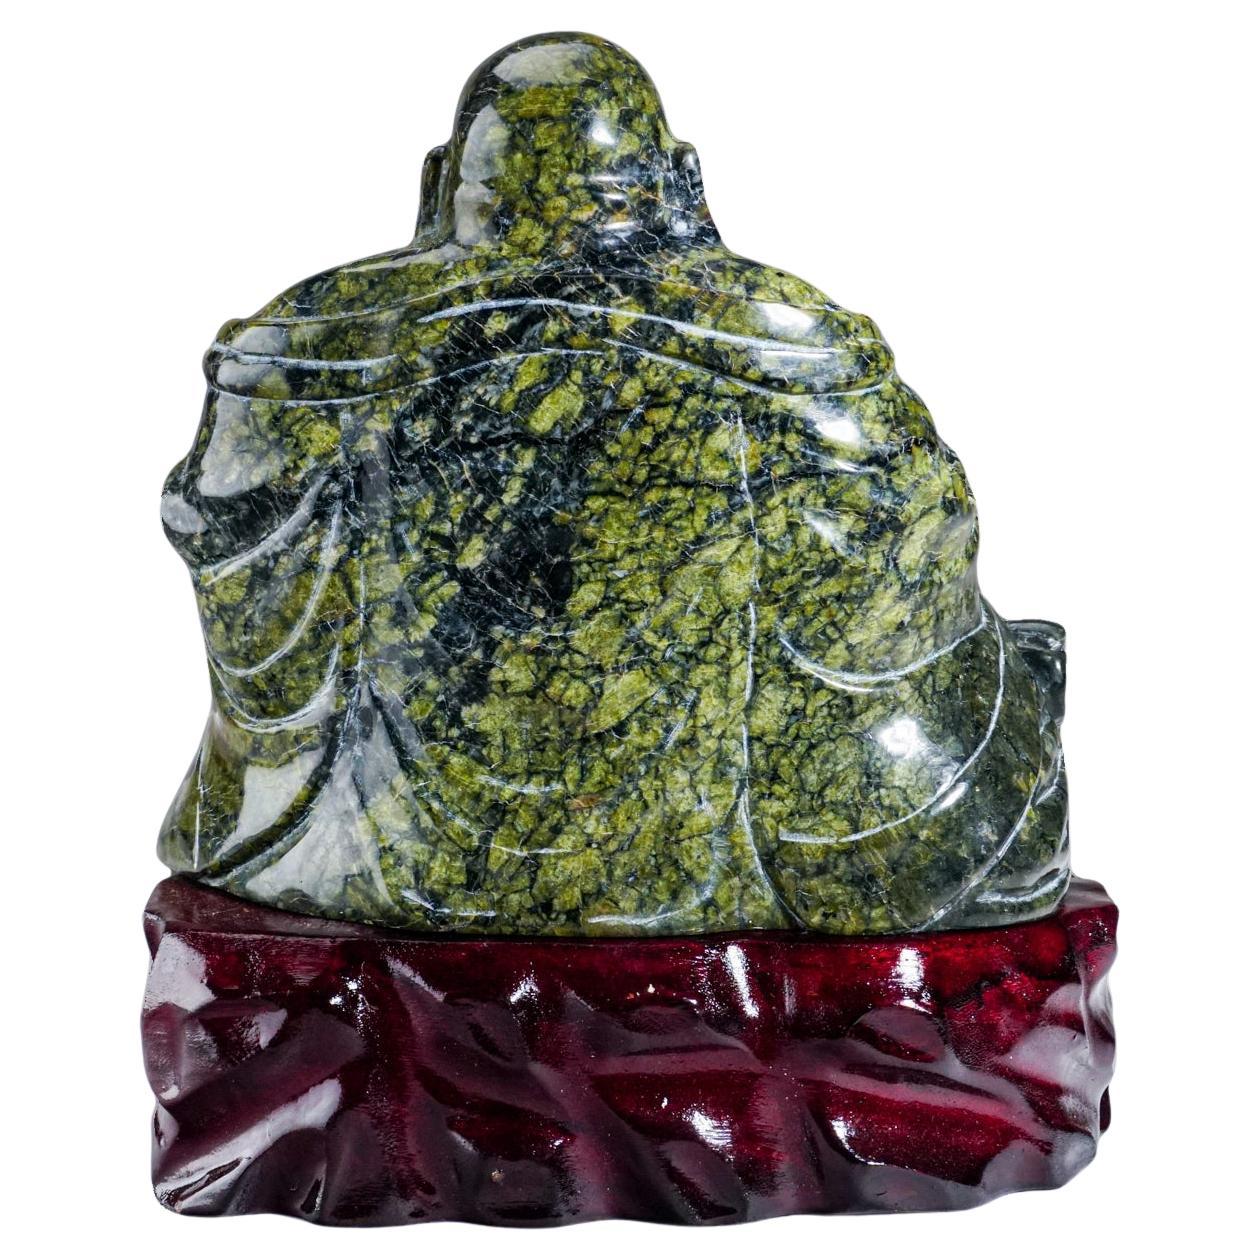 Genuine Polished Hand Carved Nephrite Jade Buddha (7 lbs)

Large hand carving of Buddha on a wooden display stand. This piece is hand carved from a solid piece of Nephrite Jade that is hand polished to a mirrored finish
 

Measures: Weight: 7 lbs,